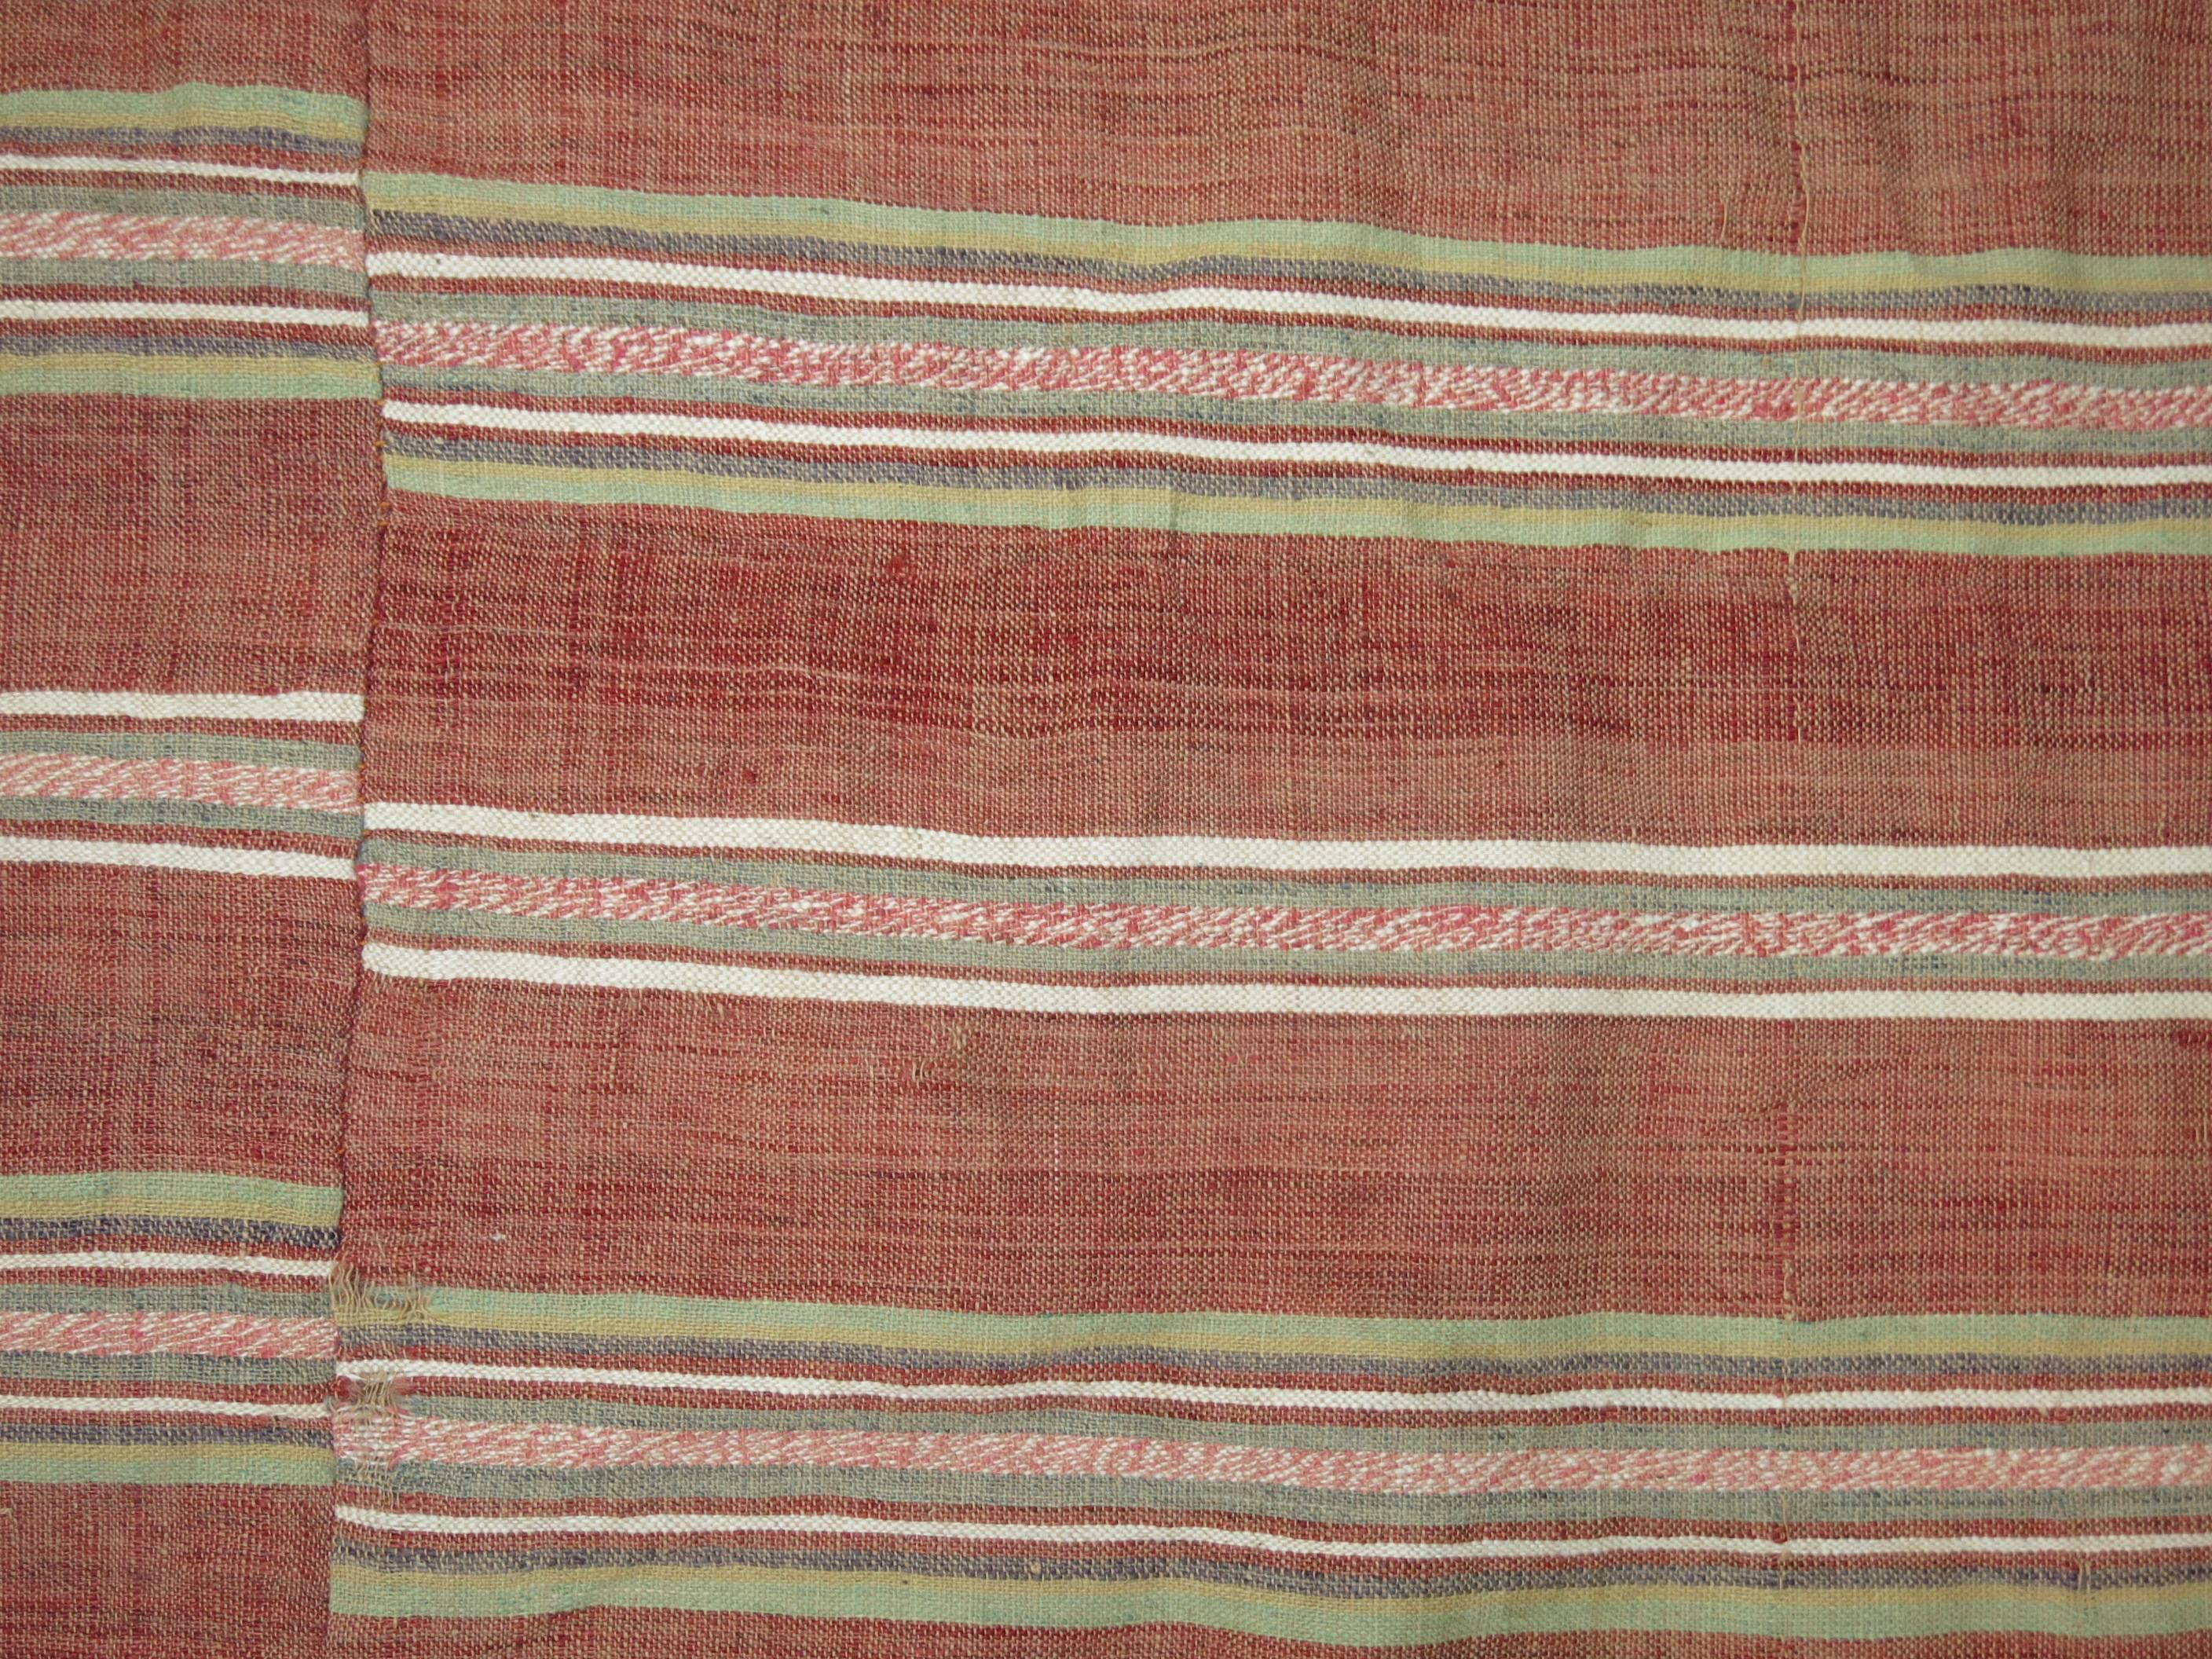 One of a kind handmade Turkish textile with banded striped design.